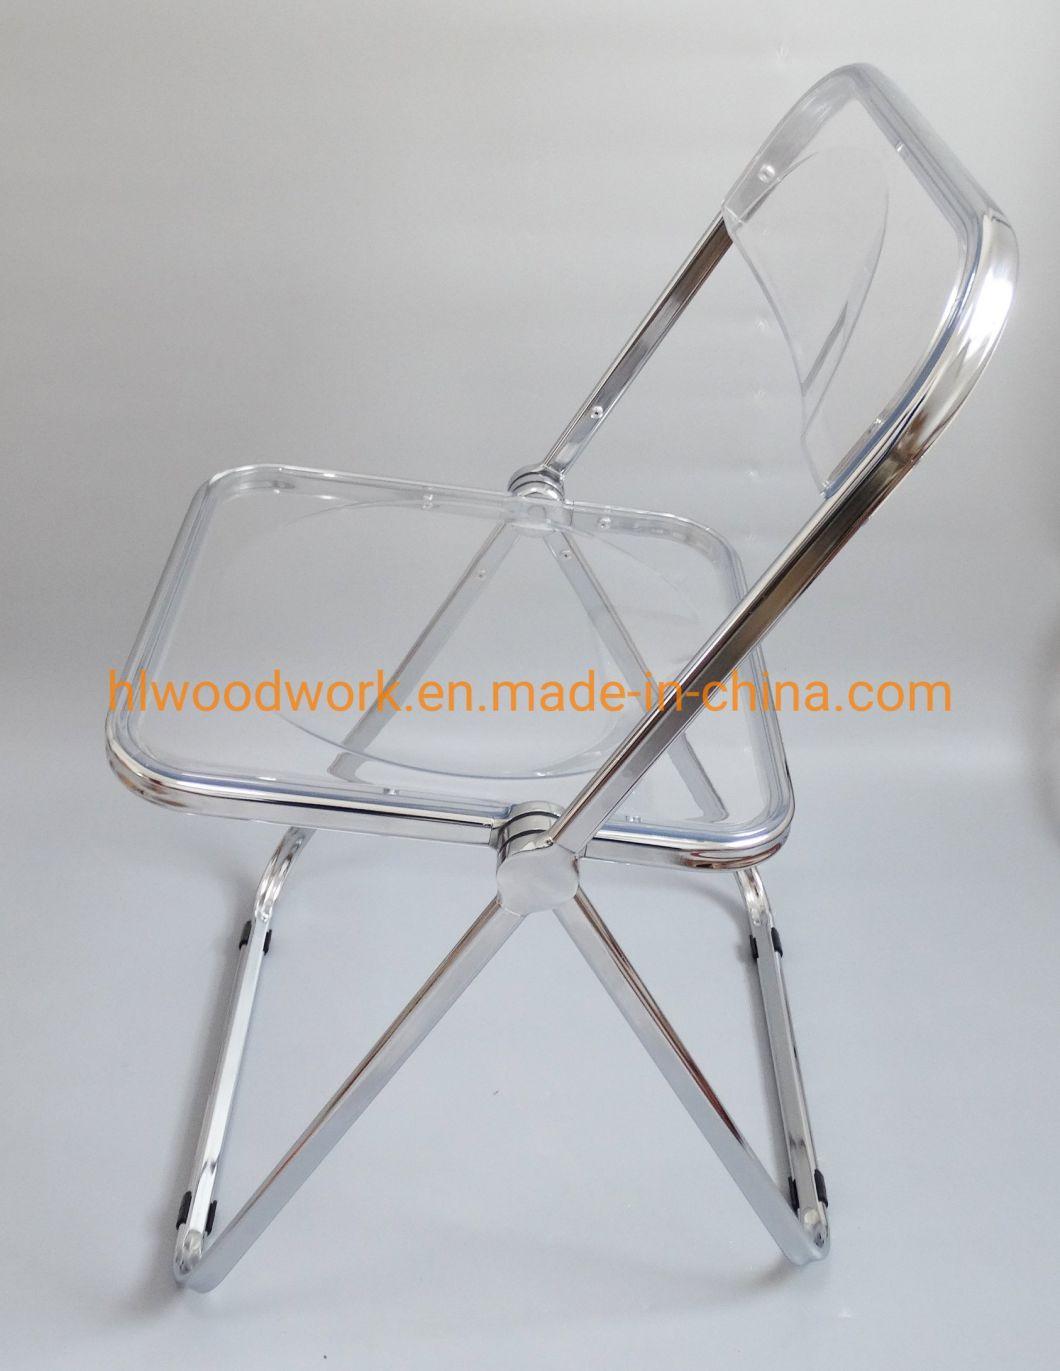 Modern Transparent Brown Folding Chair PC Plastic Study Room Chair Chrome Frame Office Bar Dining Leisure Banquet Wedding Meeting Chair Plastic Dining Chair